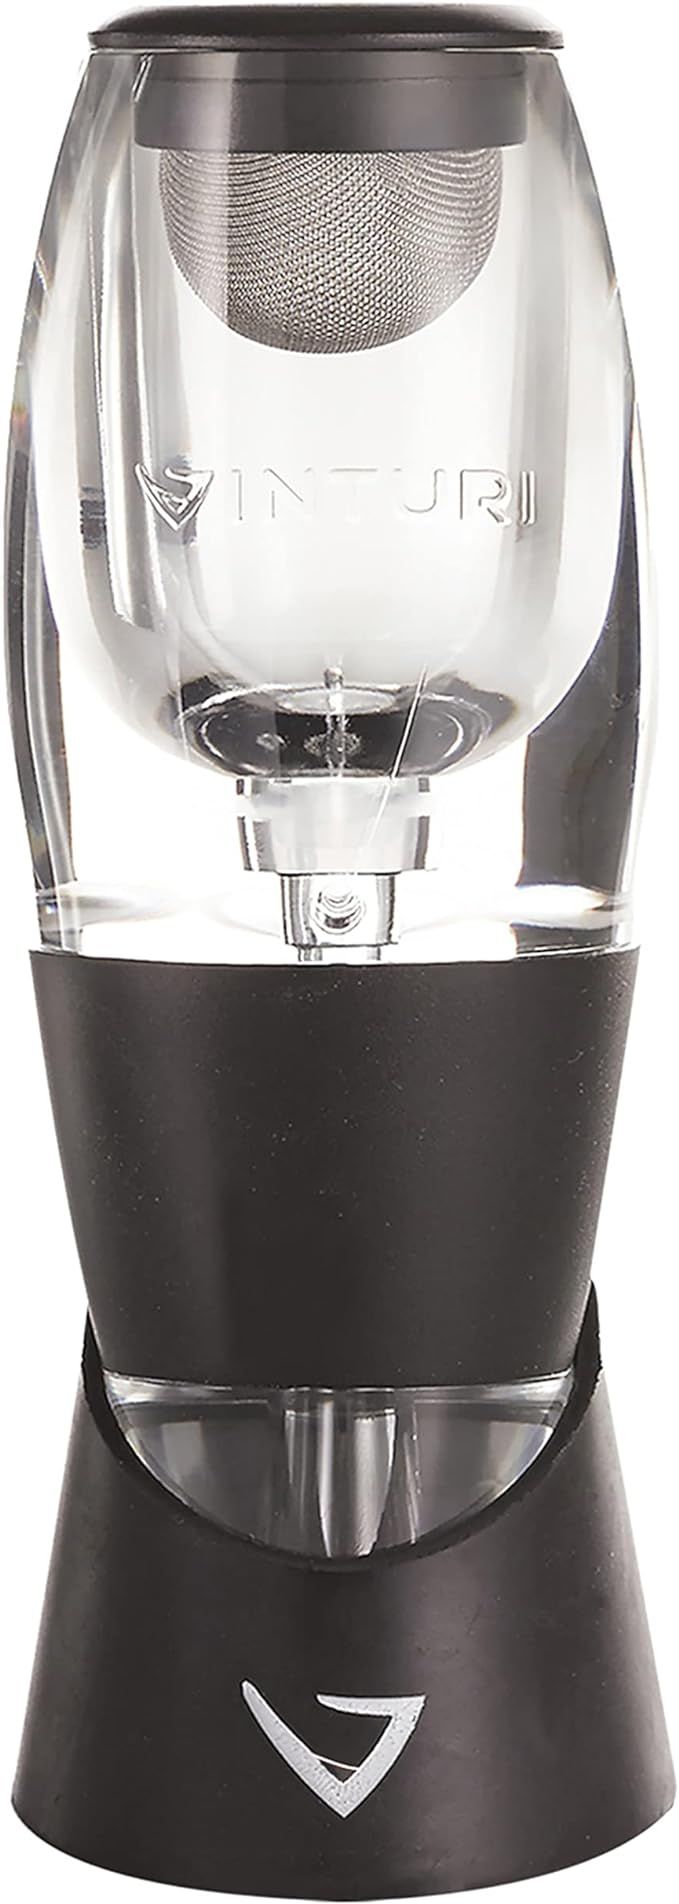 Vinturi Red Wine Aerator Includes Base Enhanced Flavors with Smoother Finish, Black | Amazon (US)